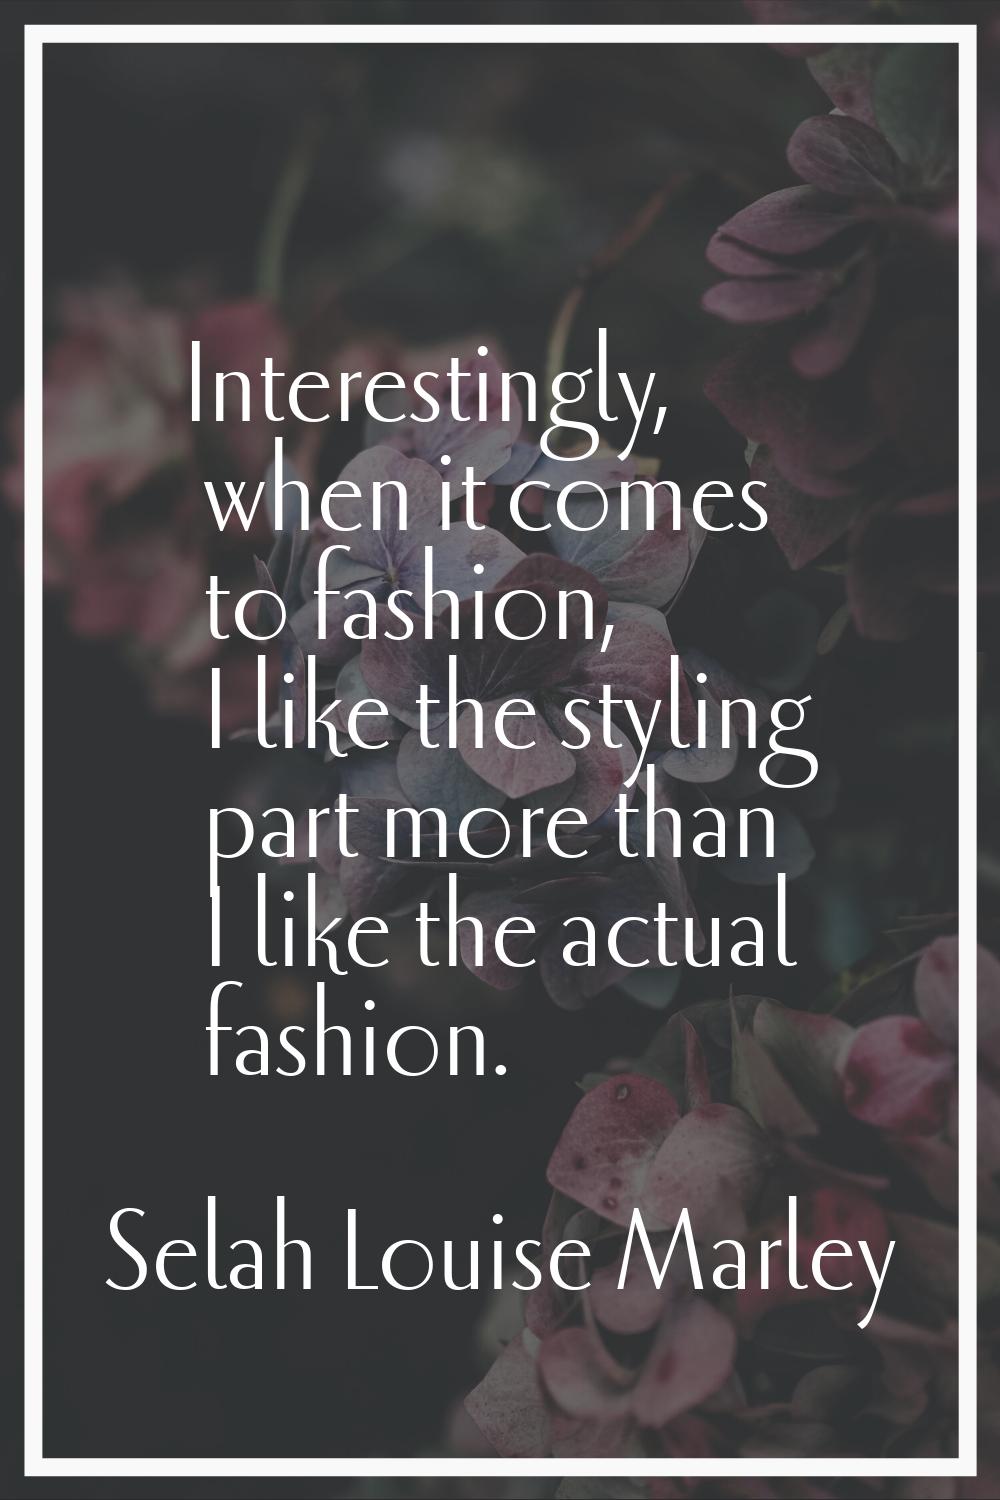 Interestingly, when it comes to fashion, I like the styling part more than I like the actual fashio